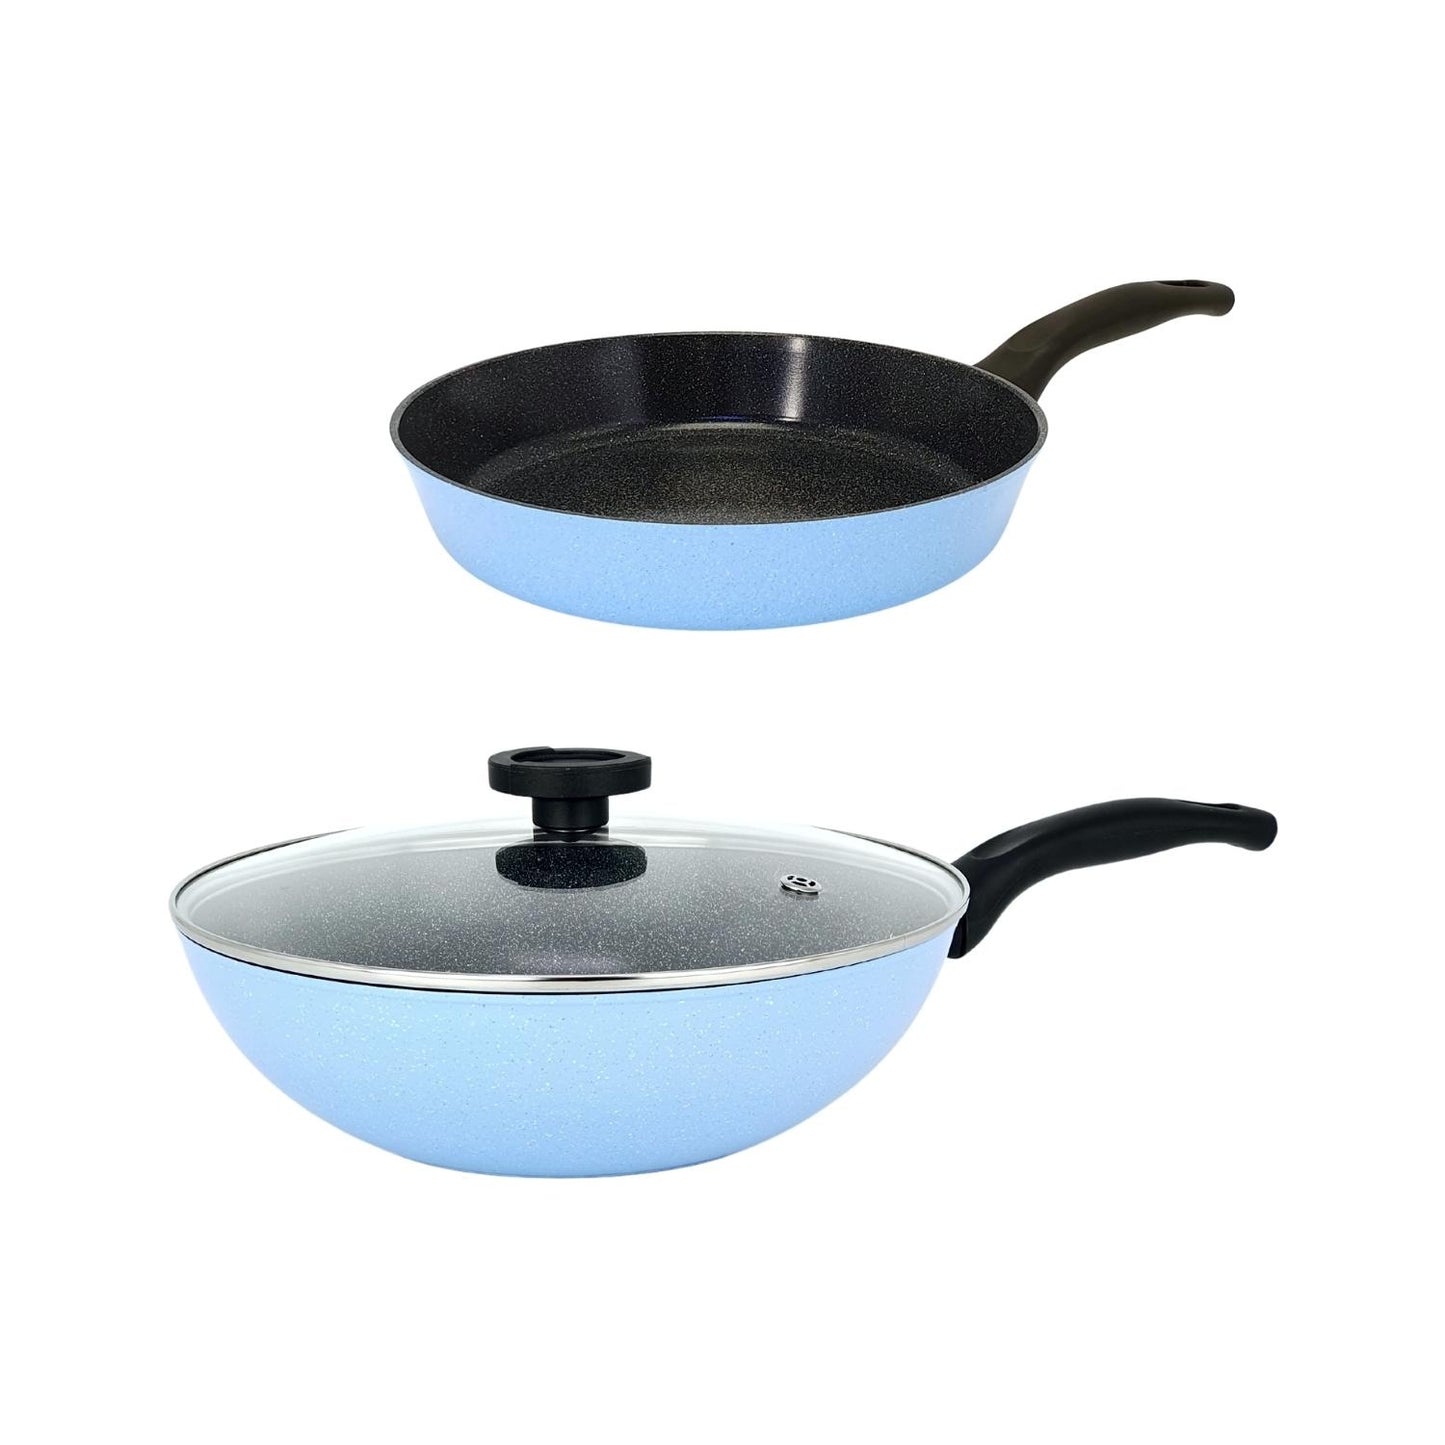 Neoflam Reverse Blue 3-Piece Cookware Set